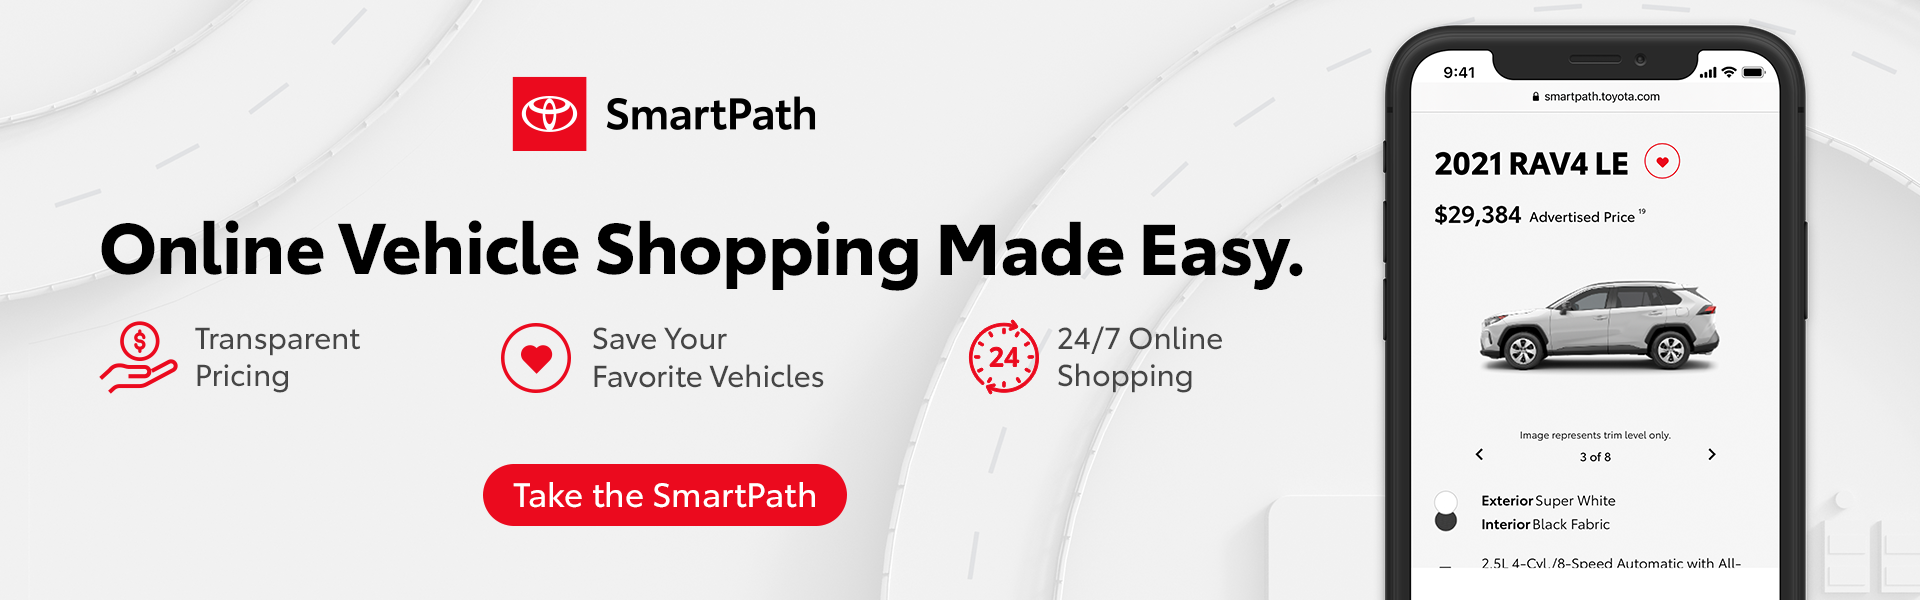 SmartPath - Online Vehicle Shopping Made Easy